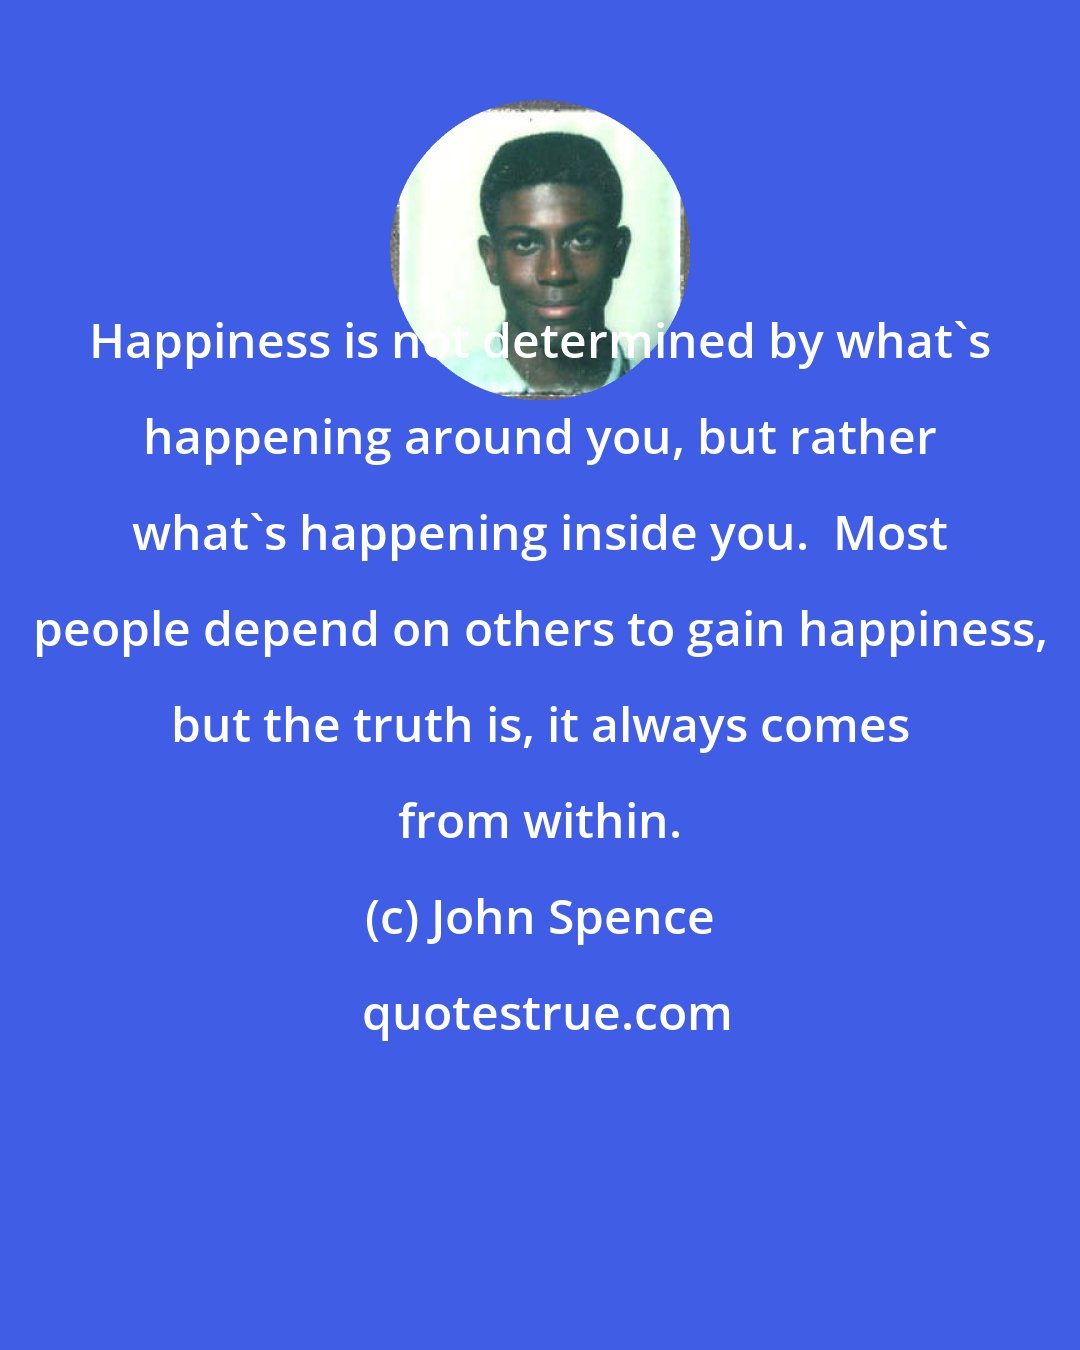 John Spence: Happiness is not determined by what's happening around you, but rather what's happening inside you.  Most people depend on others to gain happiness, but the truth is, it always comes from within.